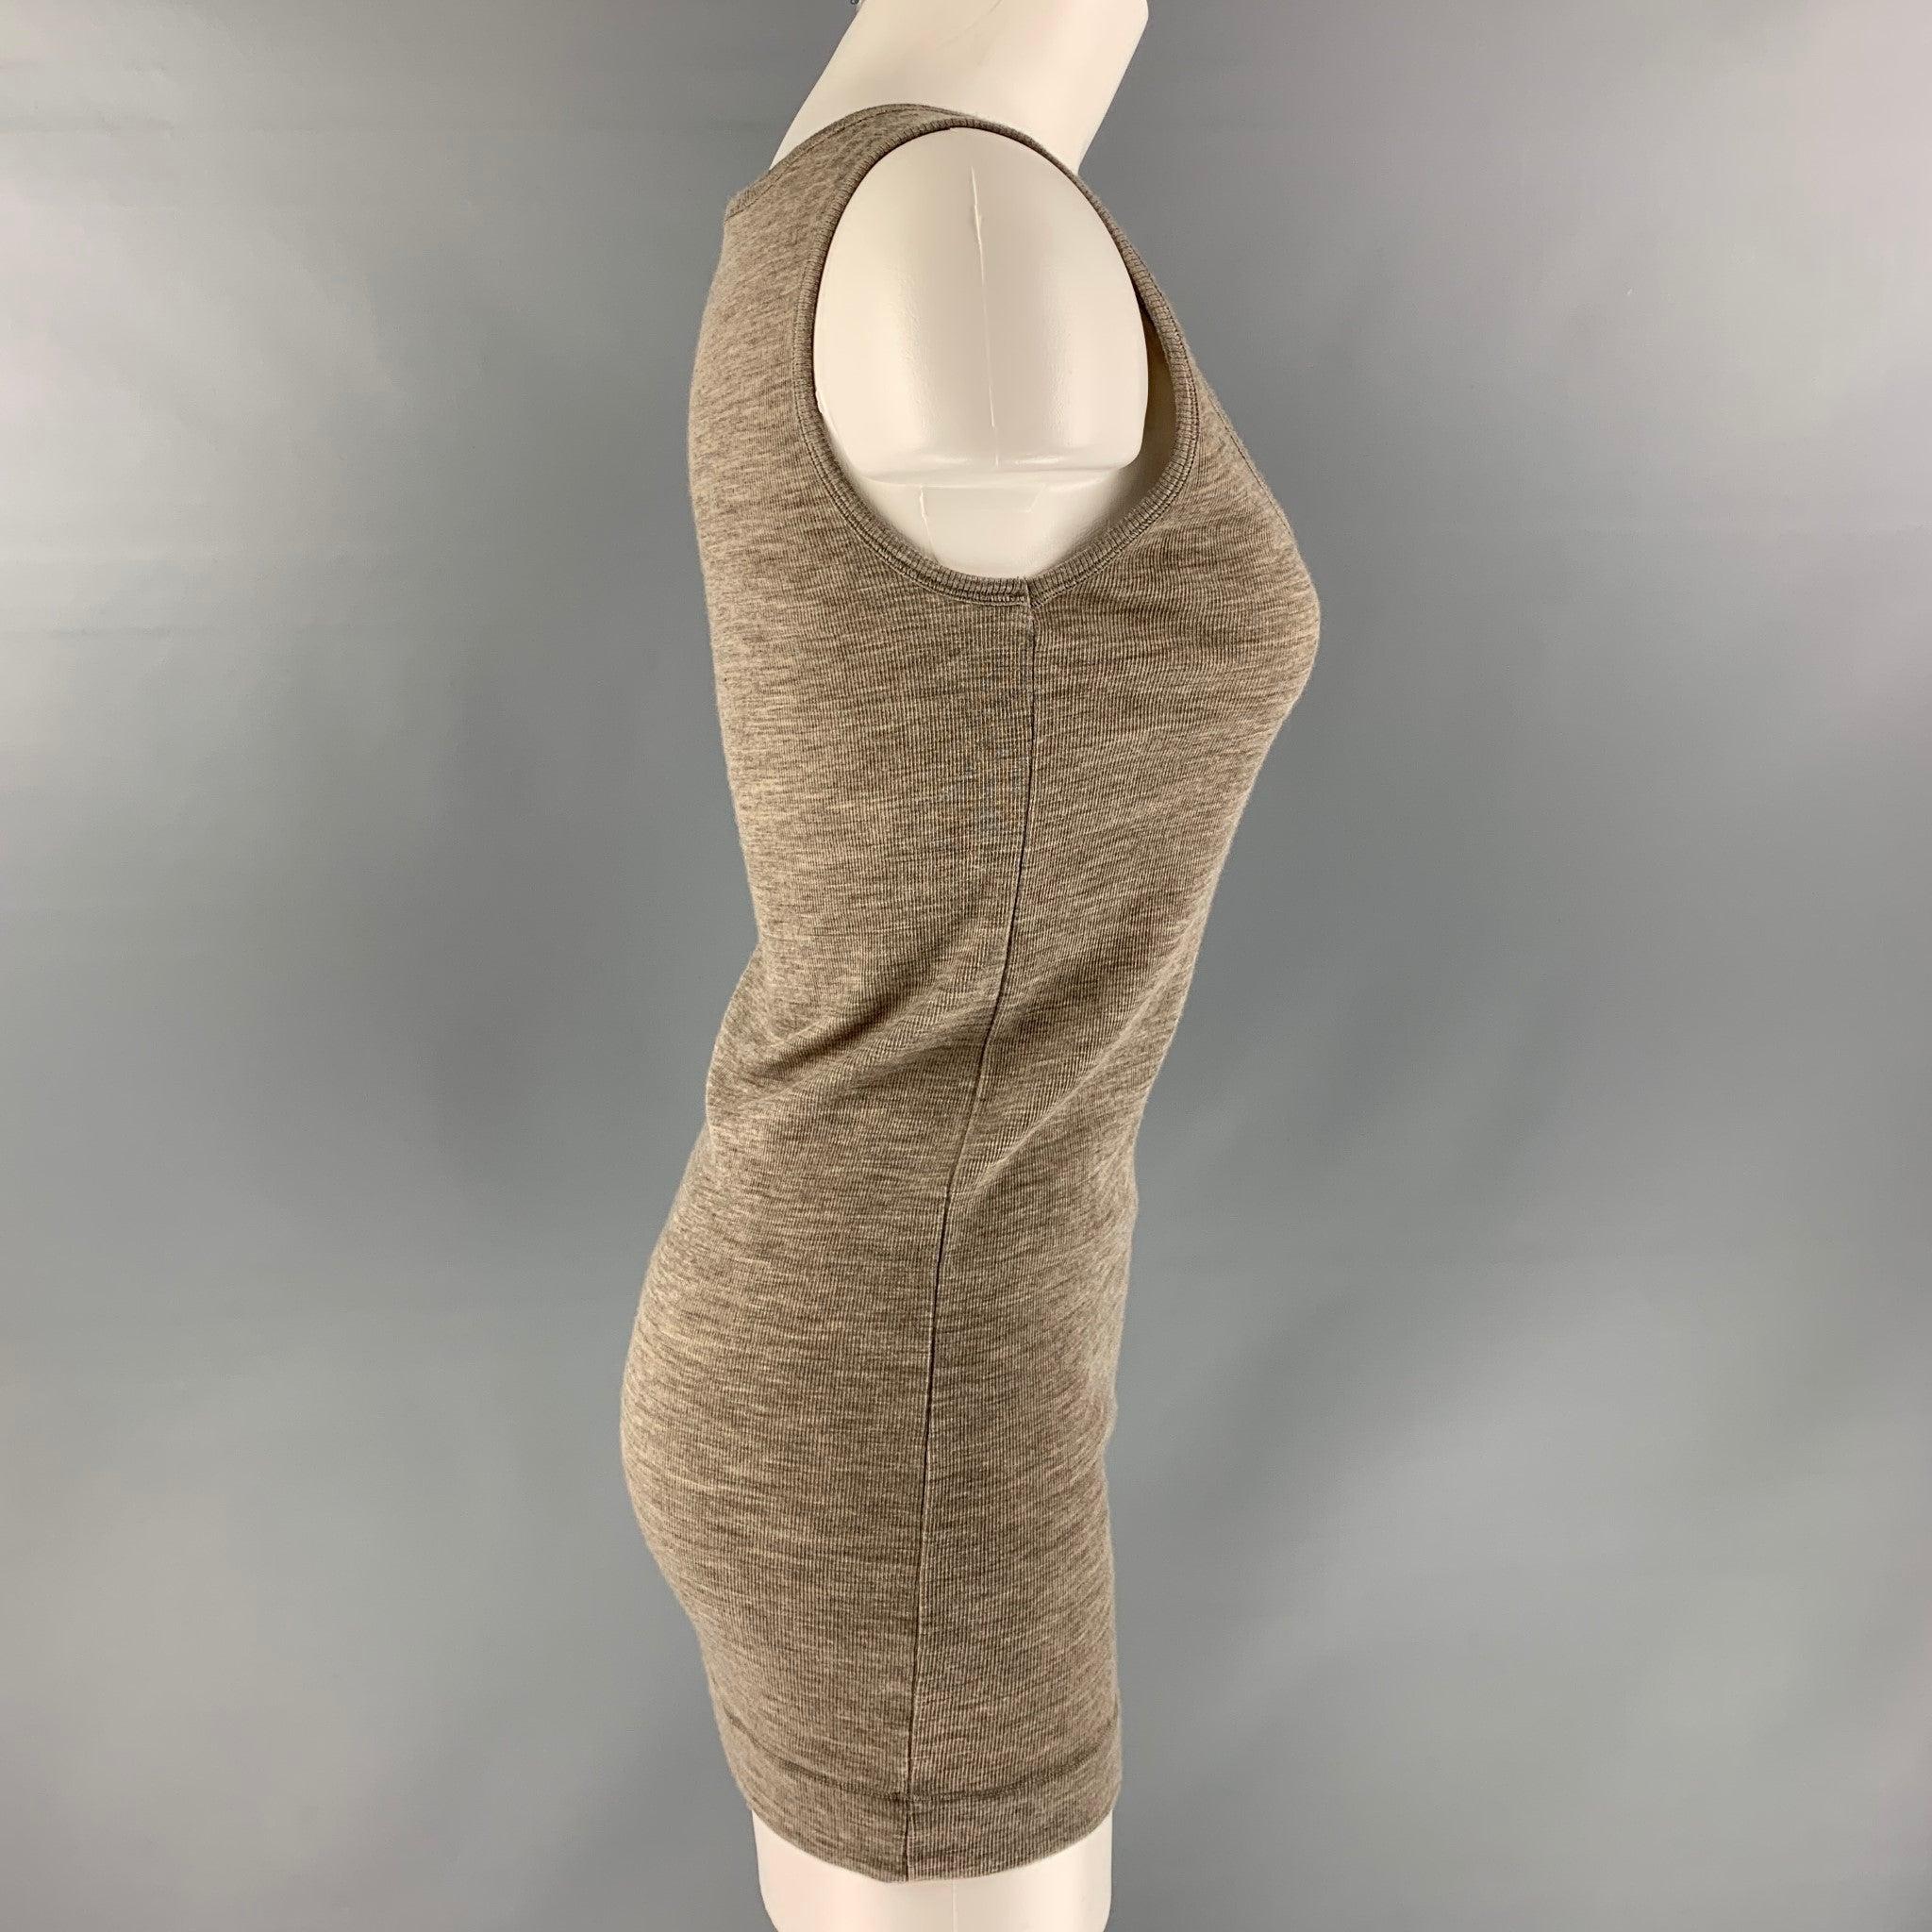 JIL SANDER tank top comes in heather taupe wool and angora ribbed knit. Made in Italy.Excellent Pre-Owned Condition. 
 

 Marked:  M 
 

 Measurements: 
  Bust: 34 inches Length: 26 inches  
  
  
  
 Sui Generis Reference: 97178
 Category: Casual